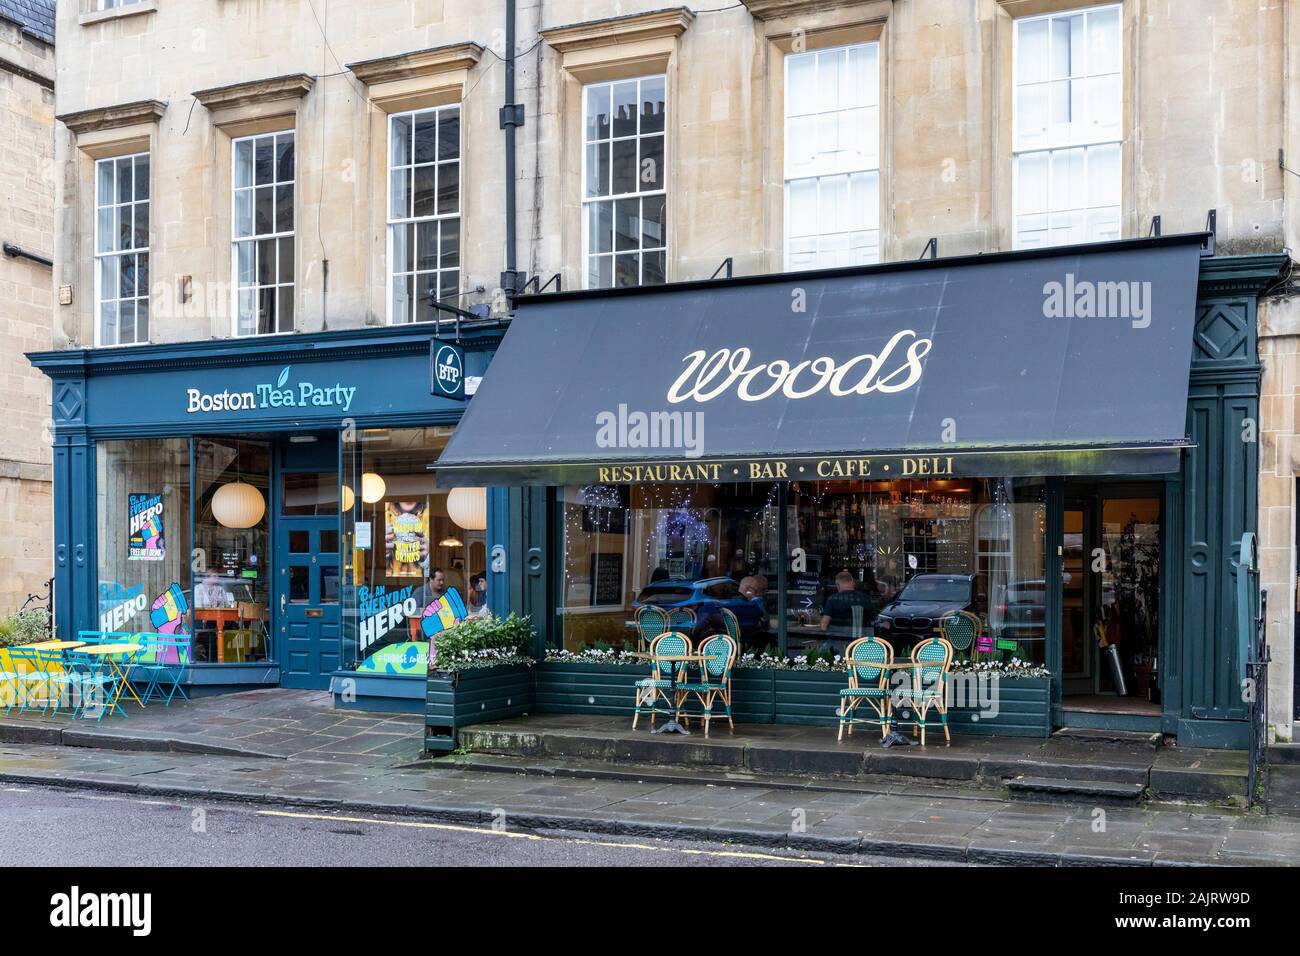 Boston Tea Party and Woods Restaurant in Alfred Street, Bath, Somerset, England Stock Photo